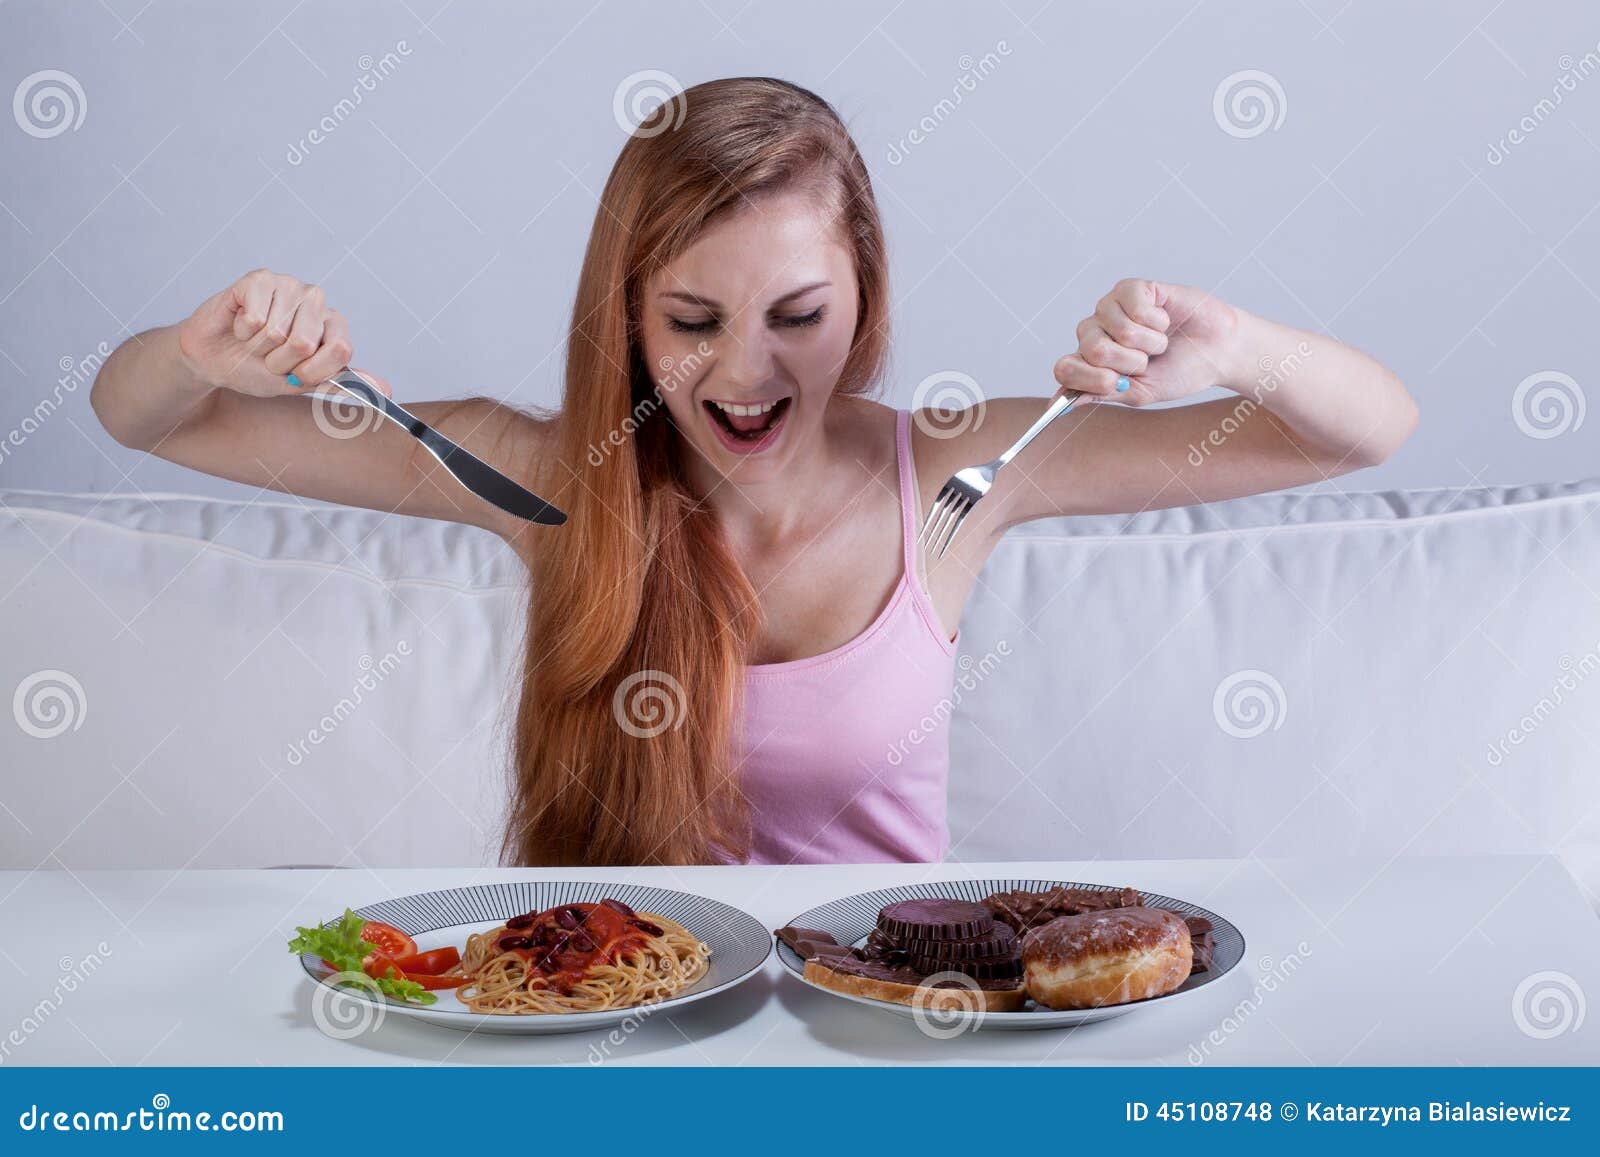 girl eating a lot of food at once